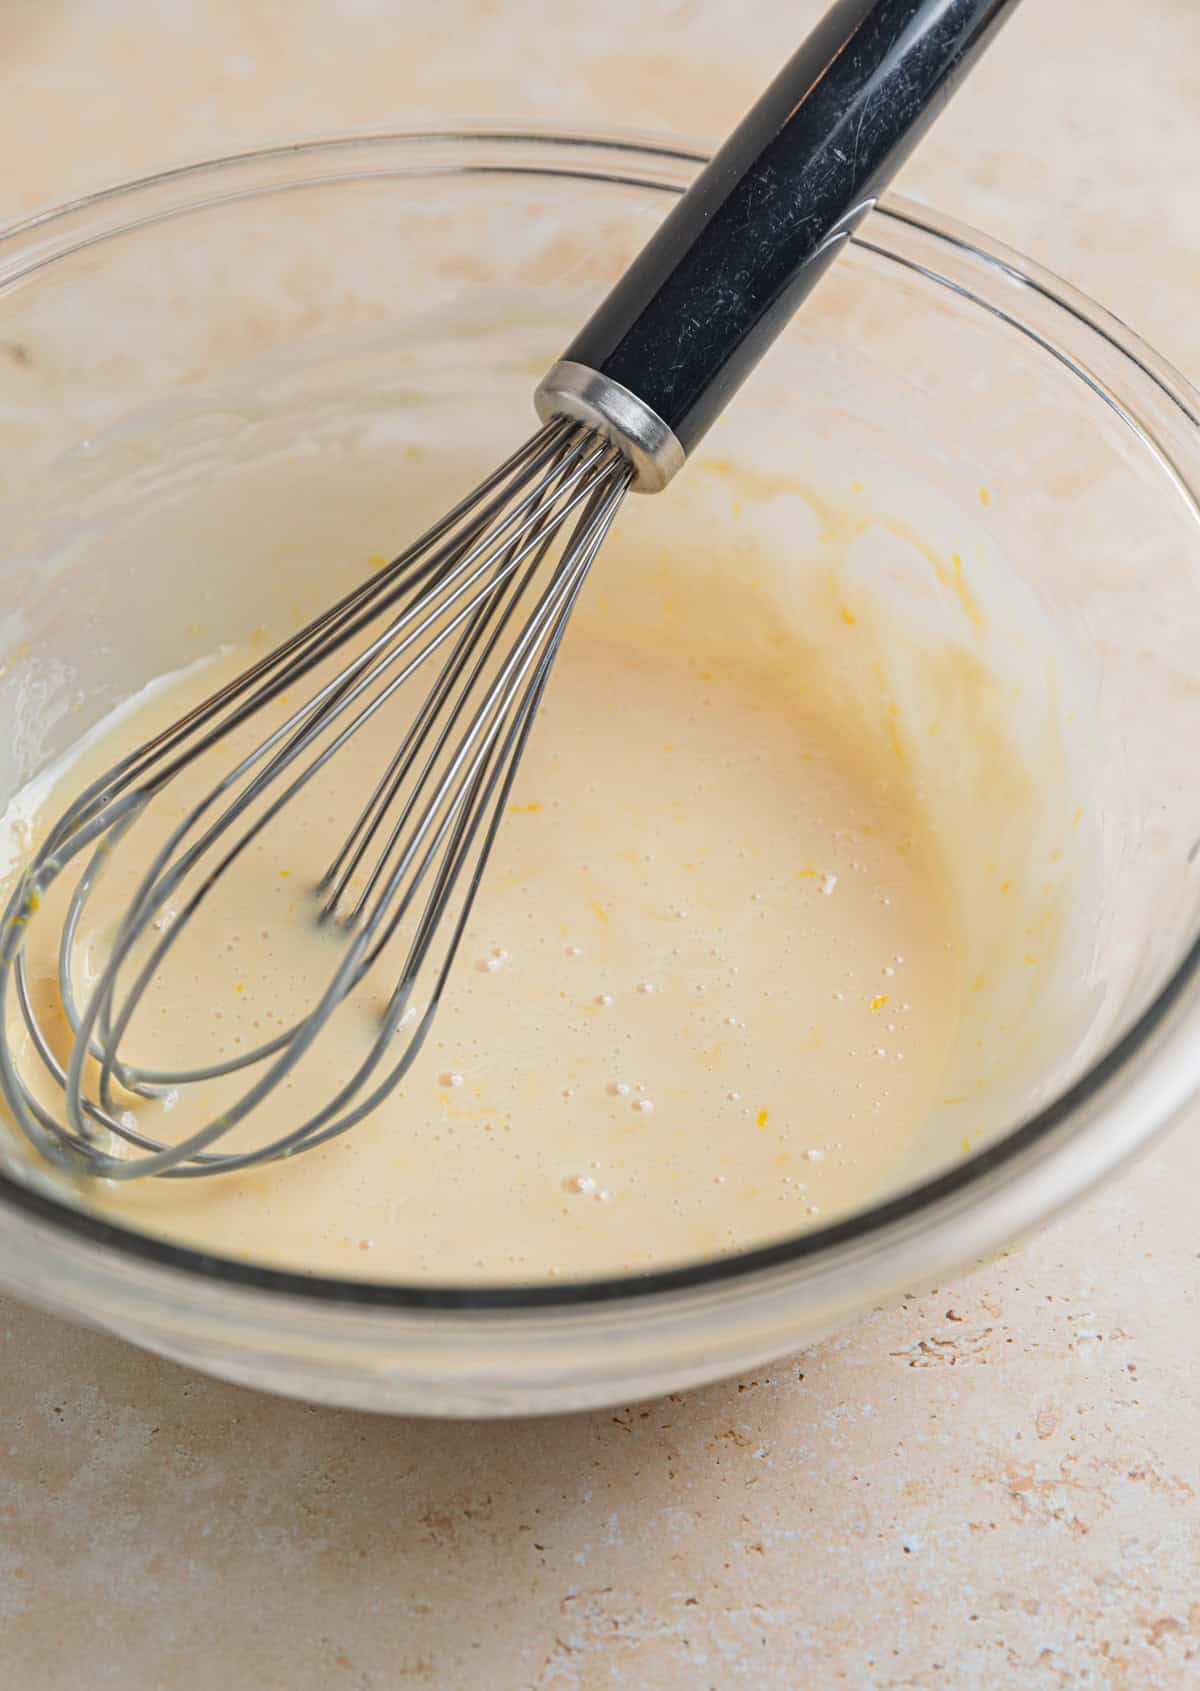 Sweetened condensed milk, lemon zest, lemon juice and vanilla whisked together in glass bowl with whisk propped in the bowl.